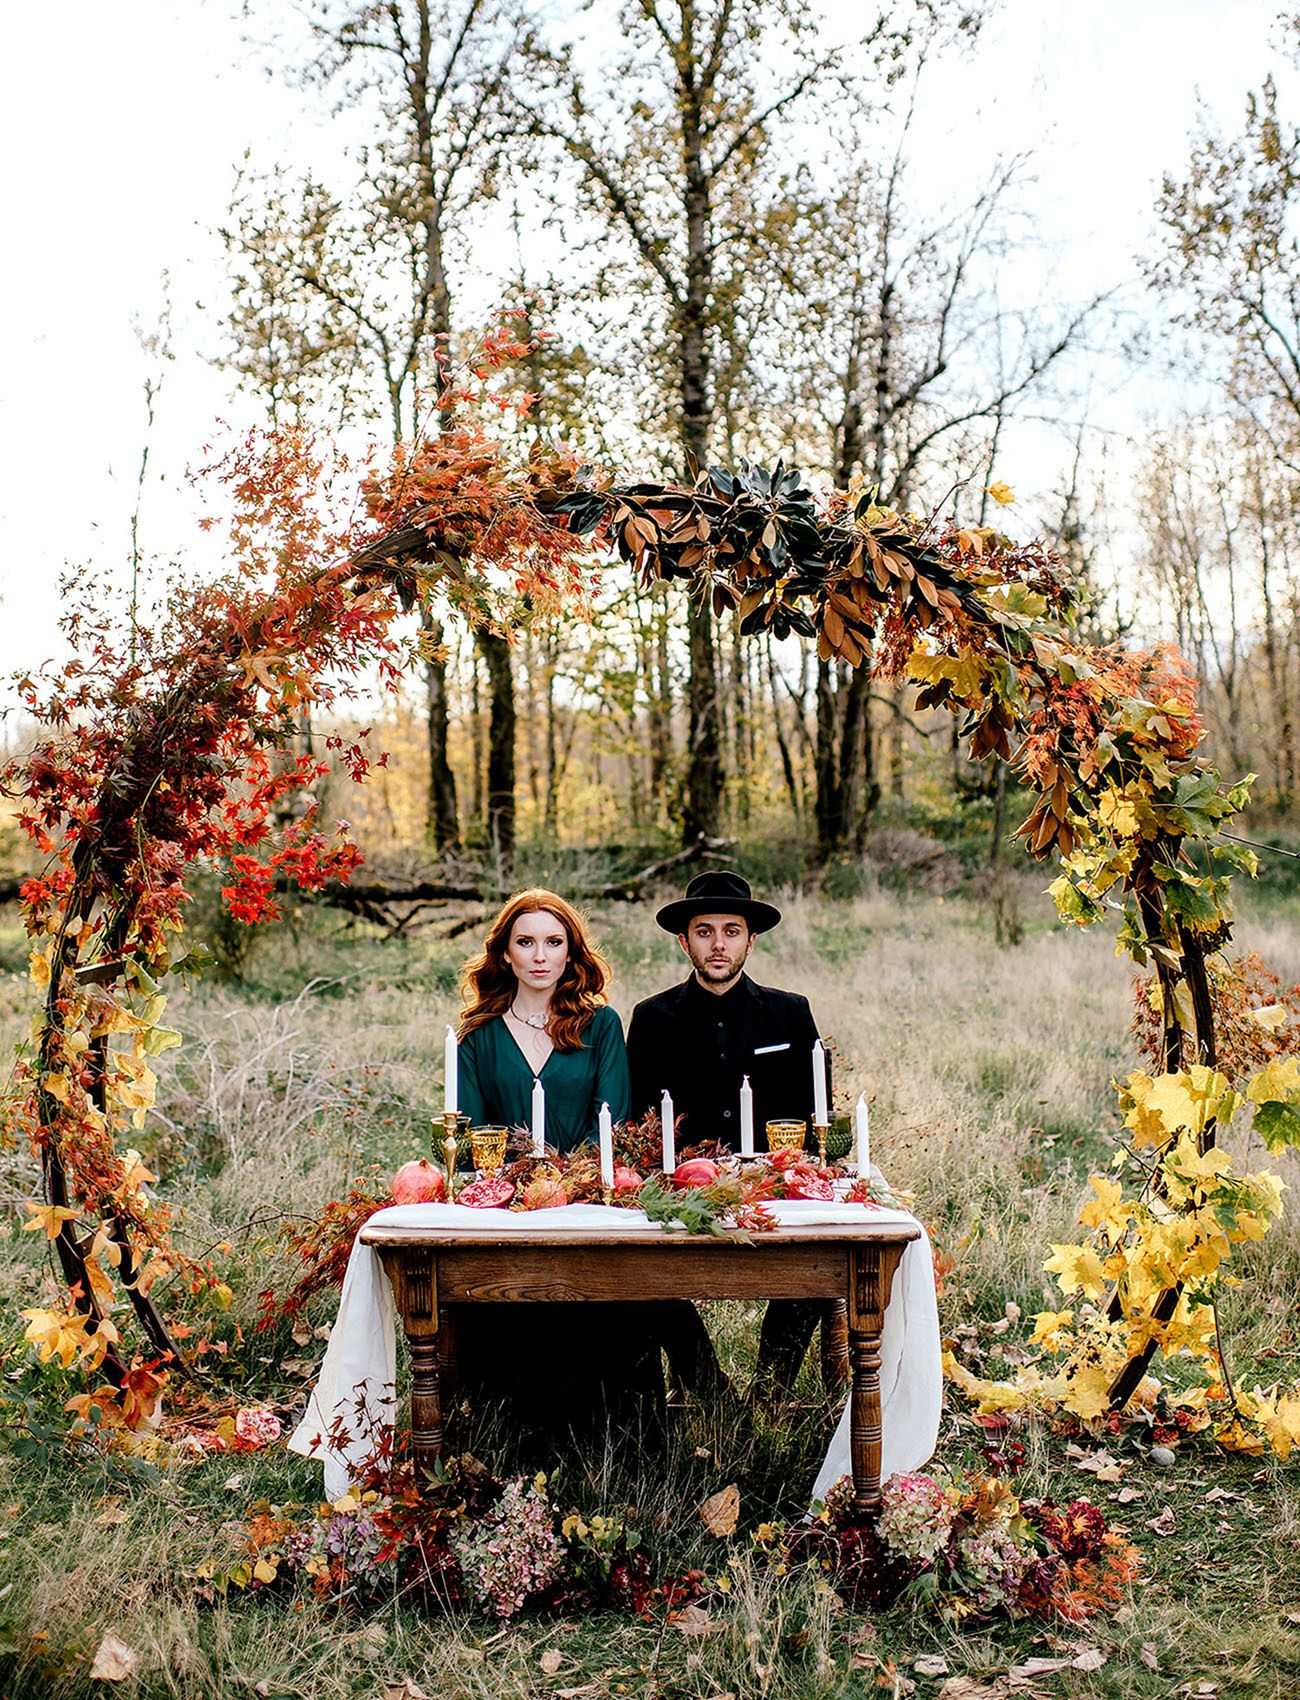 Autumn inspiration from greenweddingshoes